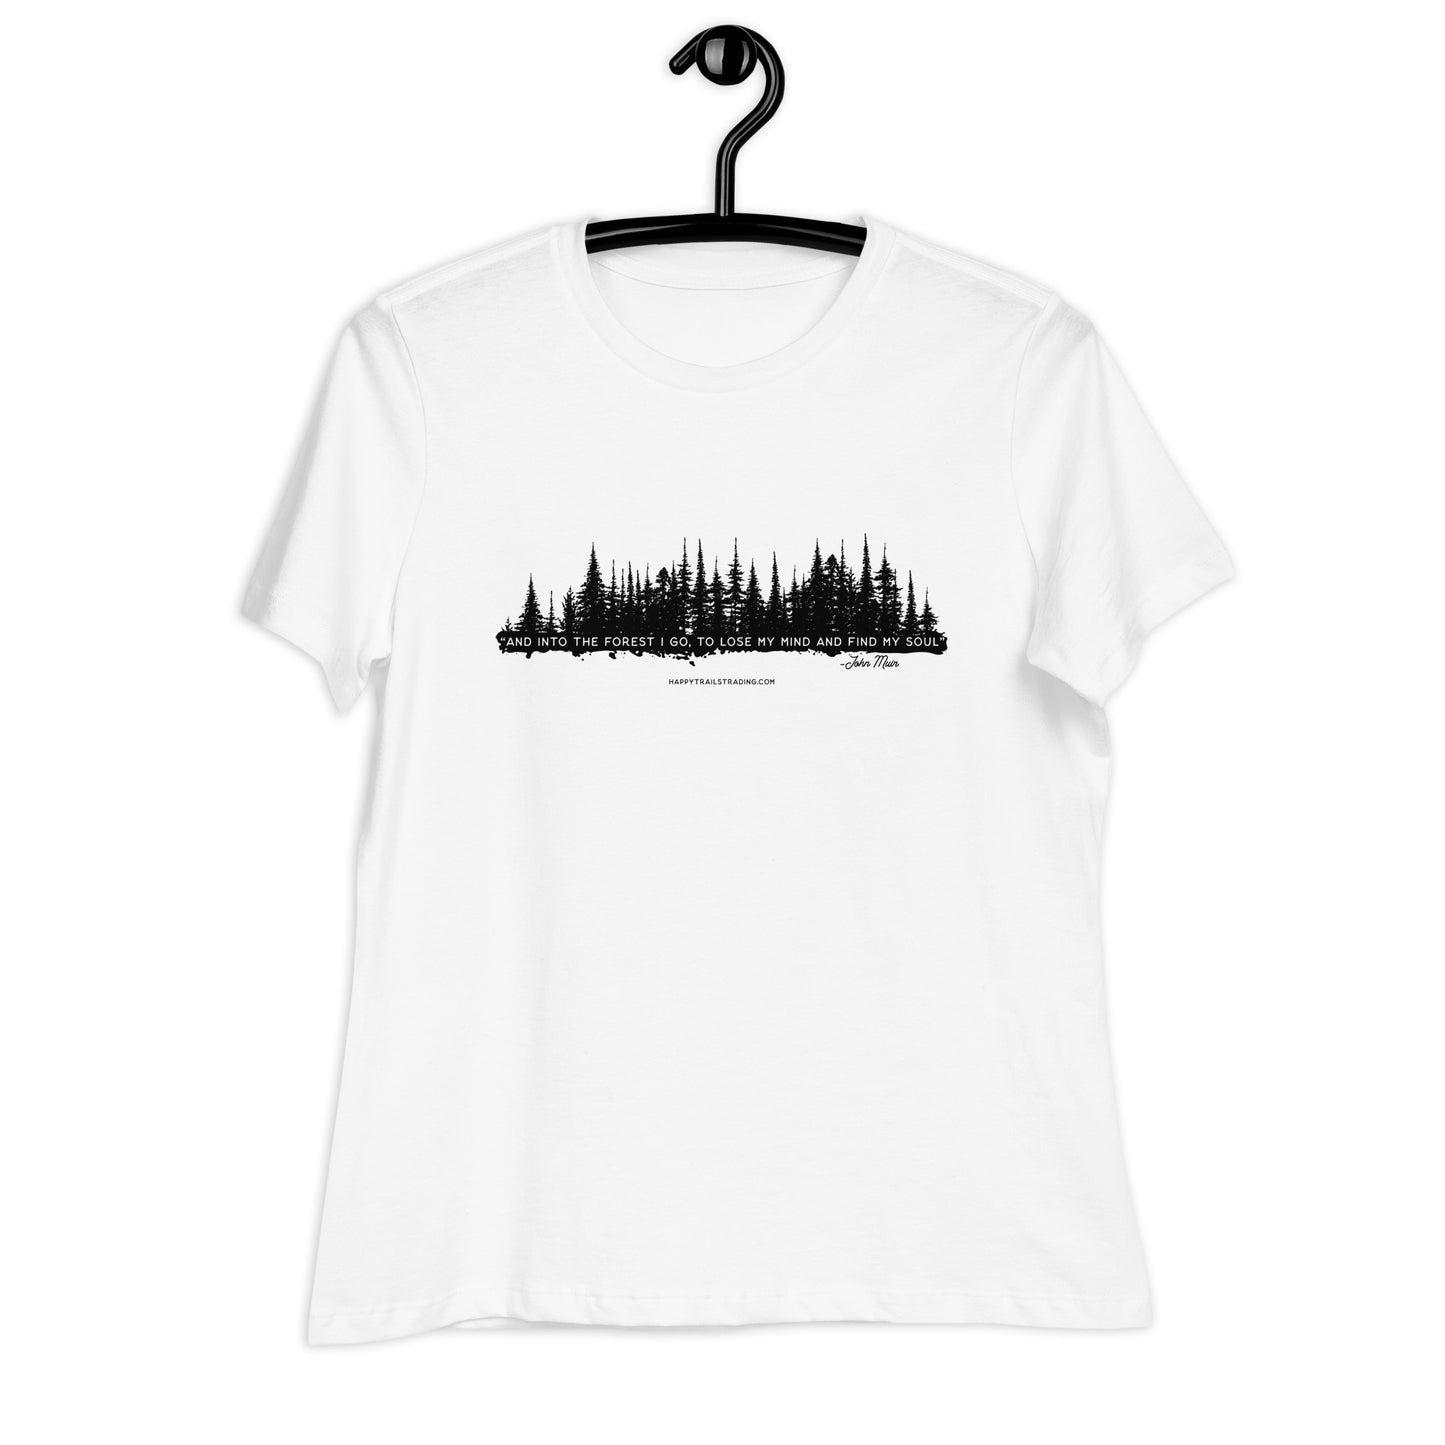 Into The Forest - Women's Relaxed T-Shirt